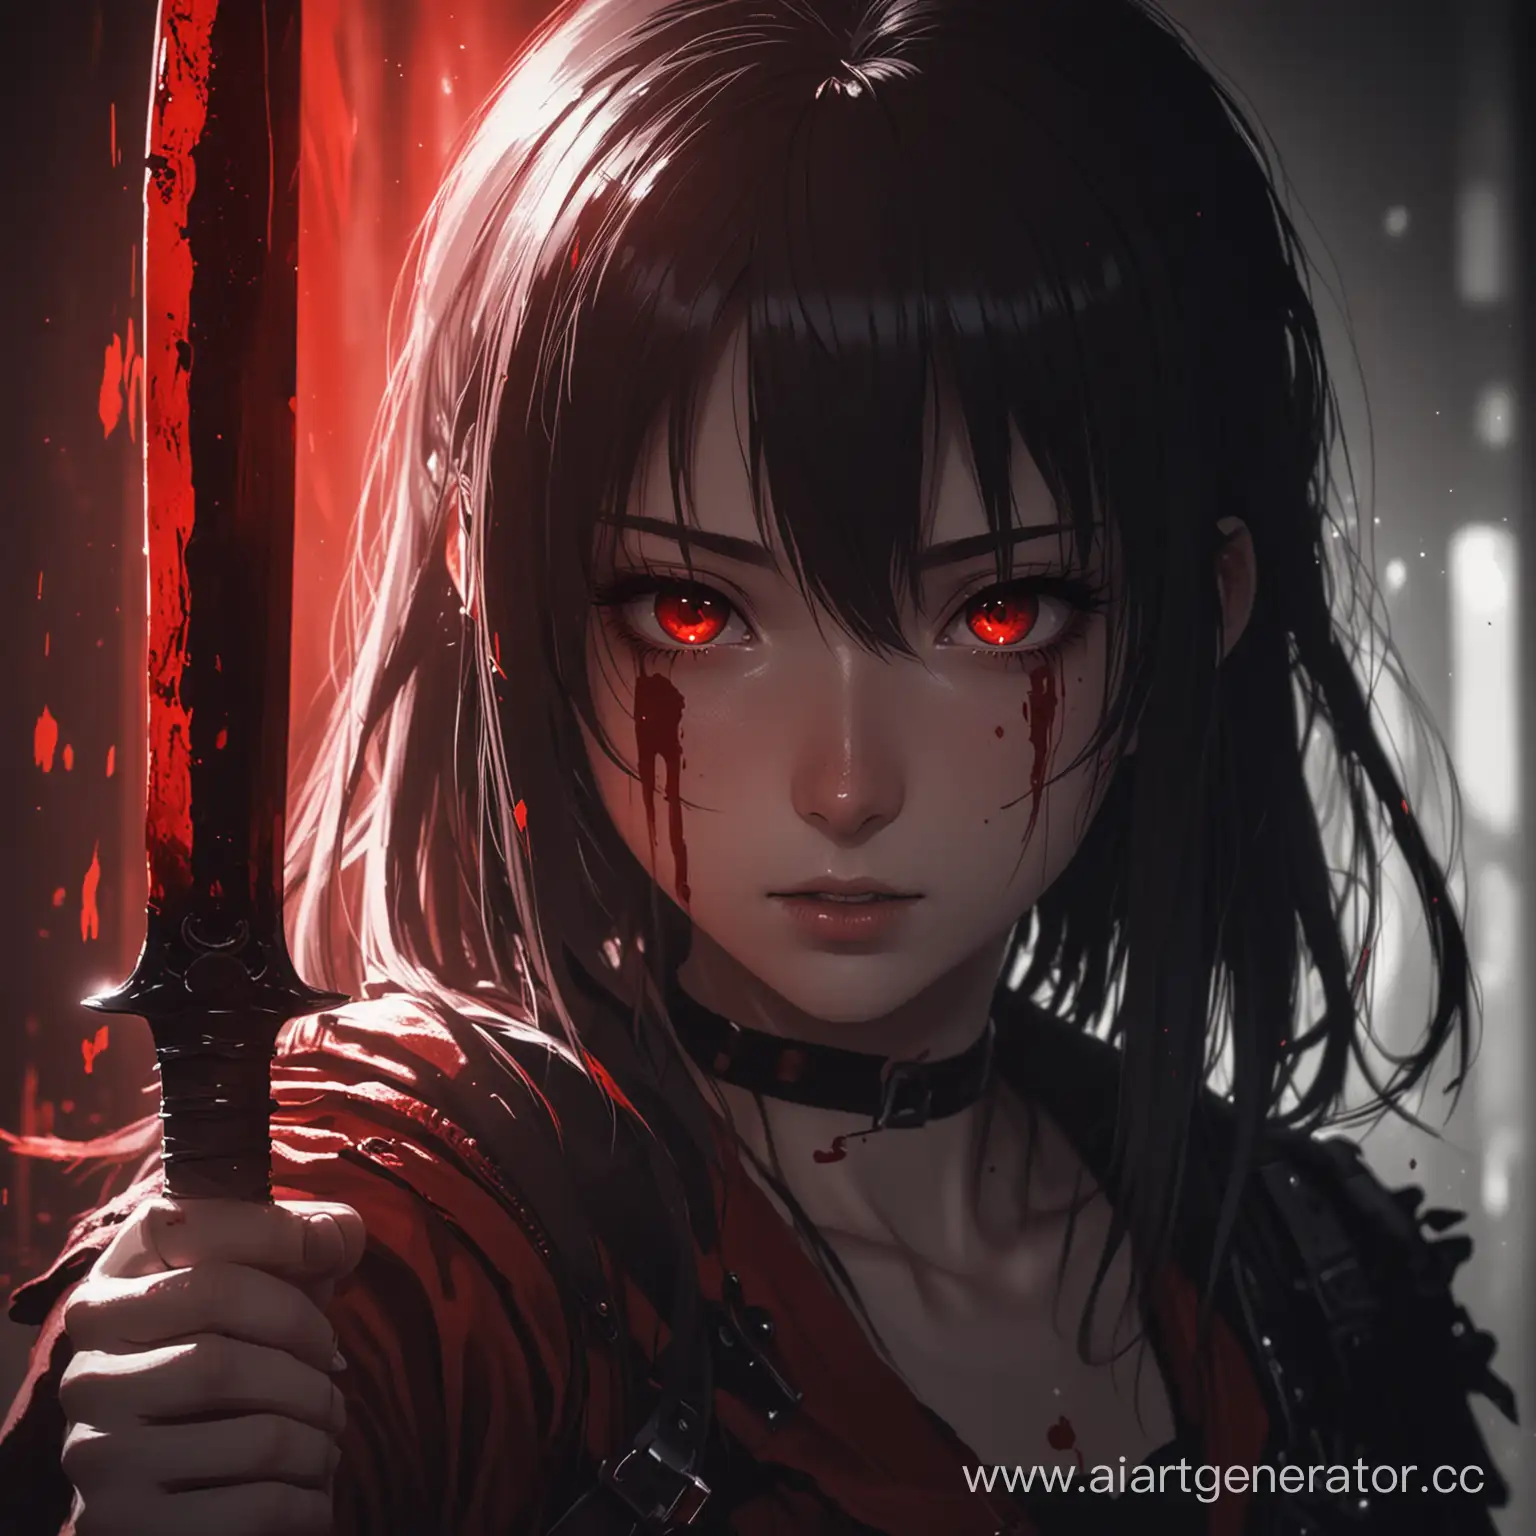 anime girl with blood knife, blood,  a red filter and red rays of light make their way into the darkness, detail light and shadows